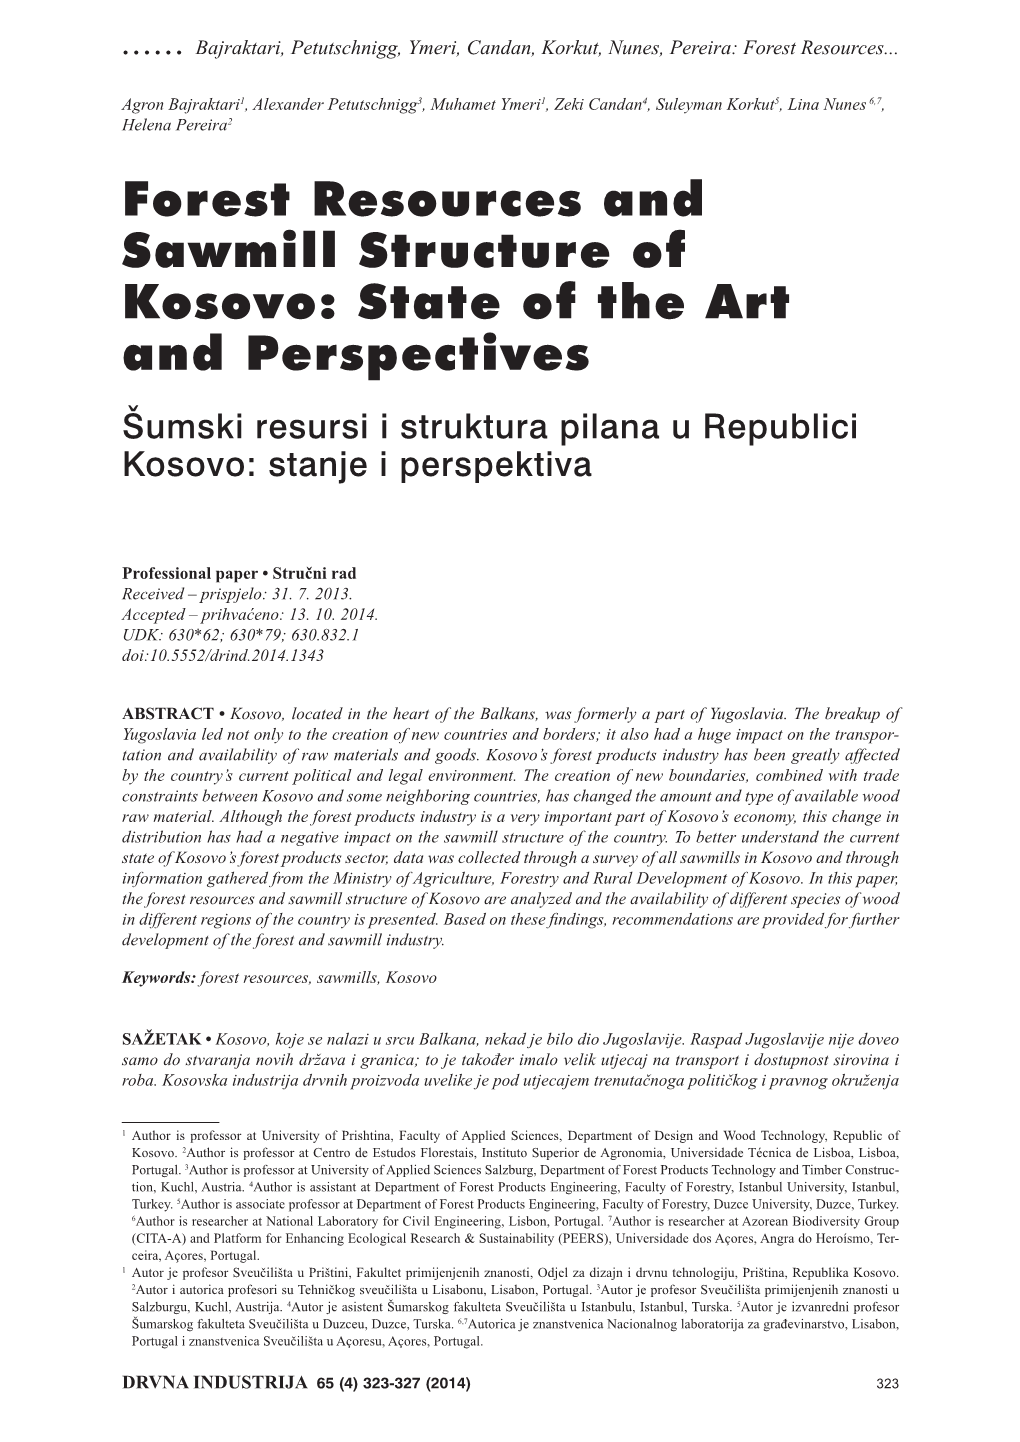 Forest Resources and Sawmill Structure of Kosovo: State of the Art and Perspectives